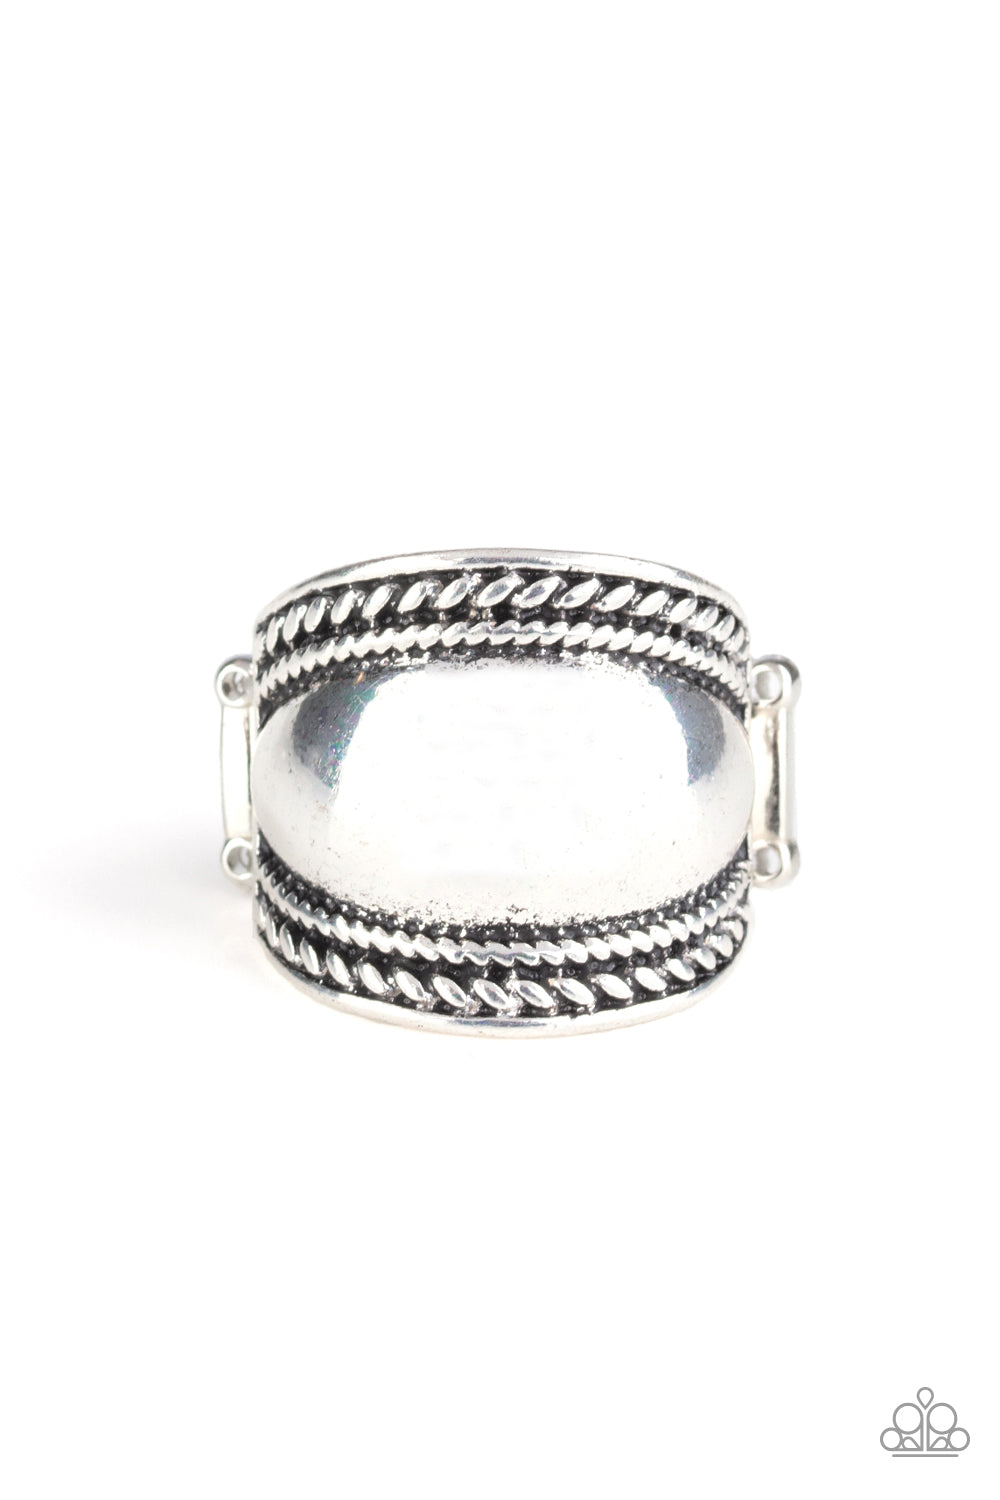 Bucking Trends - Silver Ring